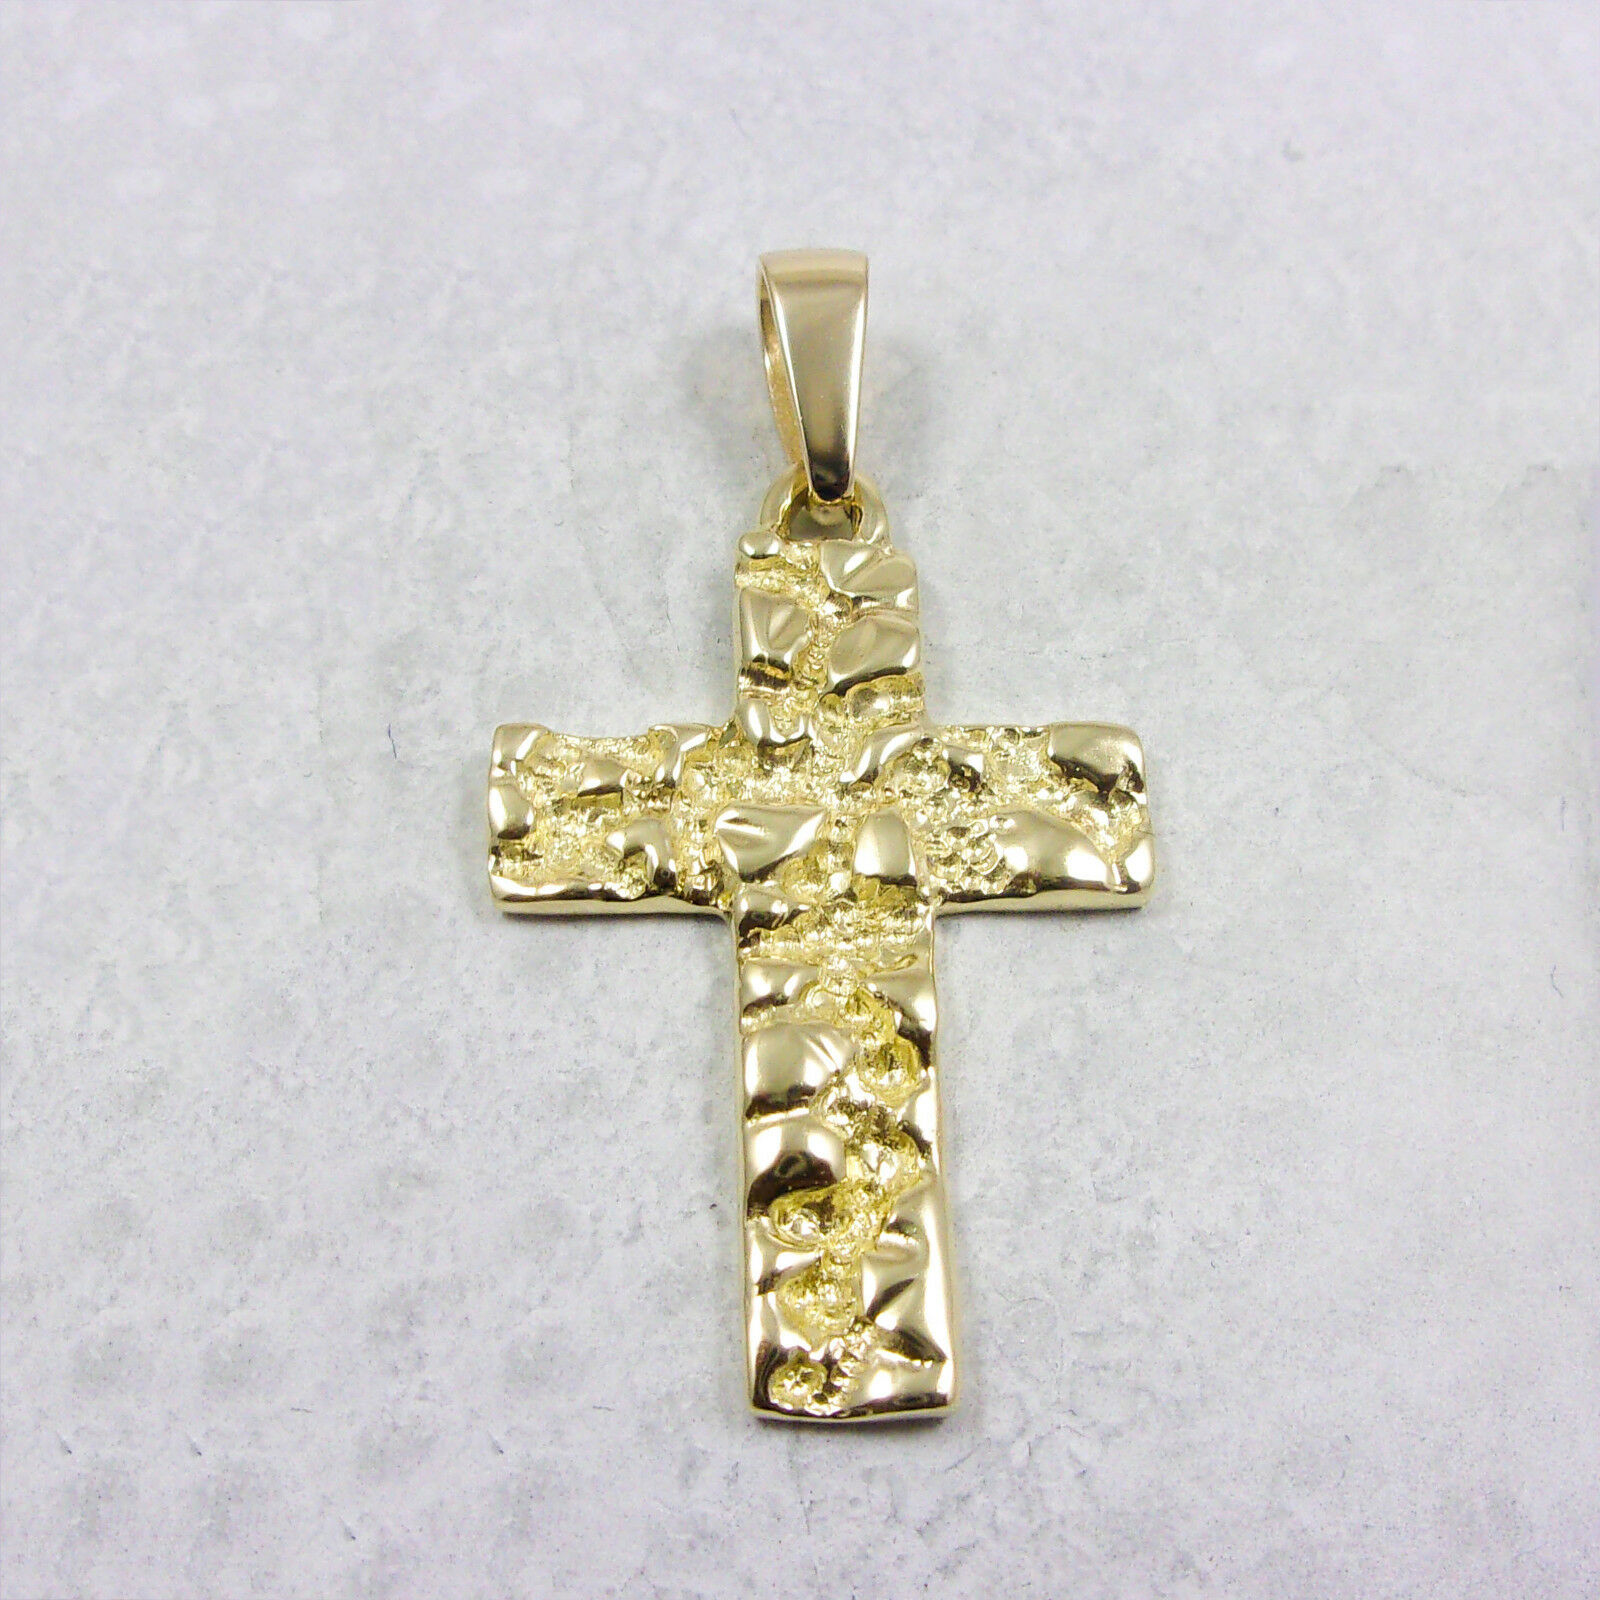 4.1 grams NEW Solid 10K Yellow Gold Mens Nugget Cross Crucifix Pendant Charm 